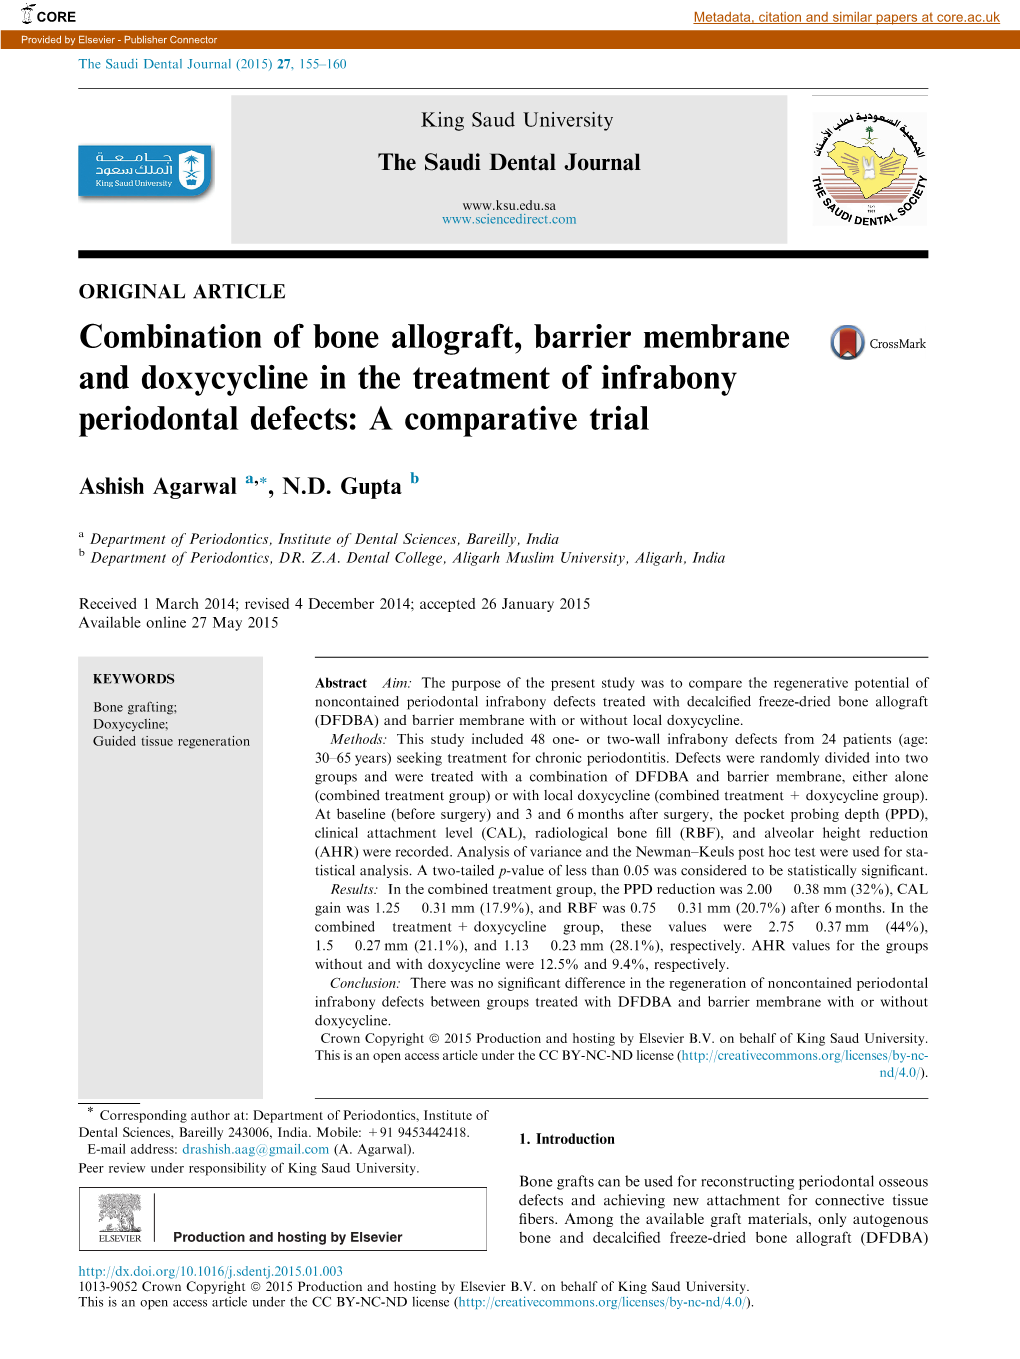 Combination of Bone Allograft, Barrier Membrane and Doxycycline in the Treatment of Infrabony Periodontal Defects: a Comparative Trial